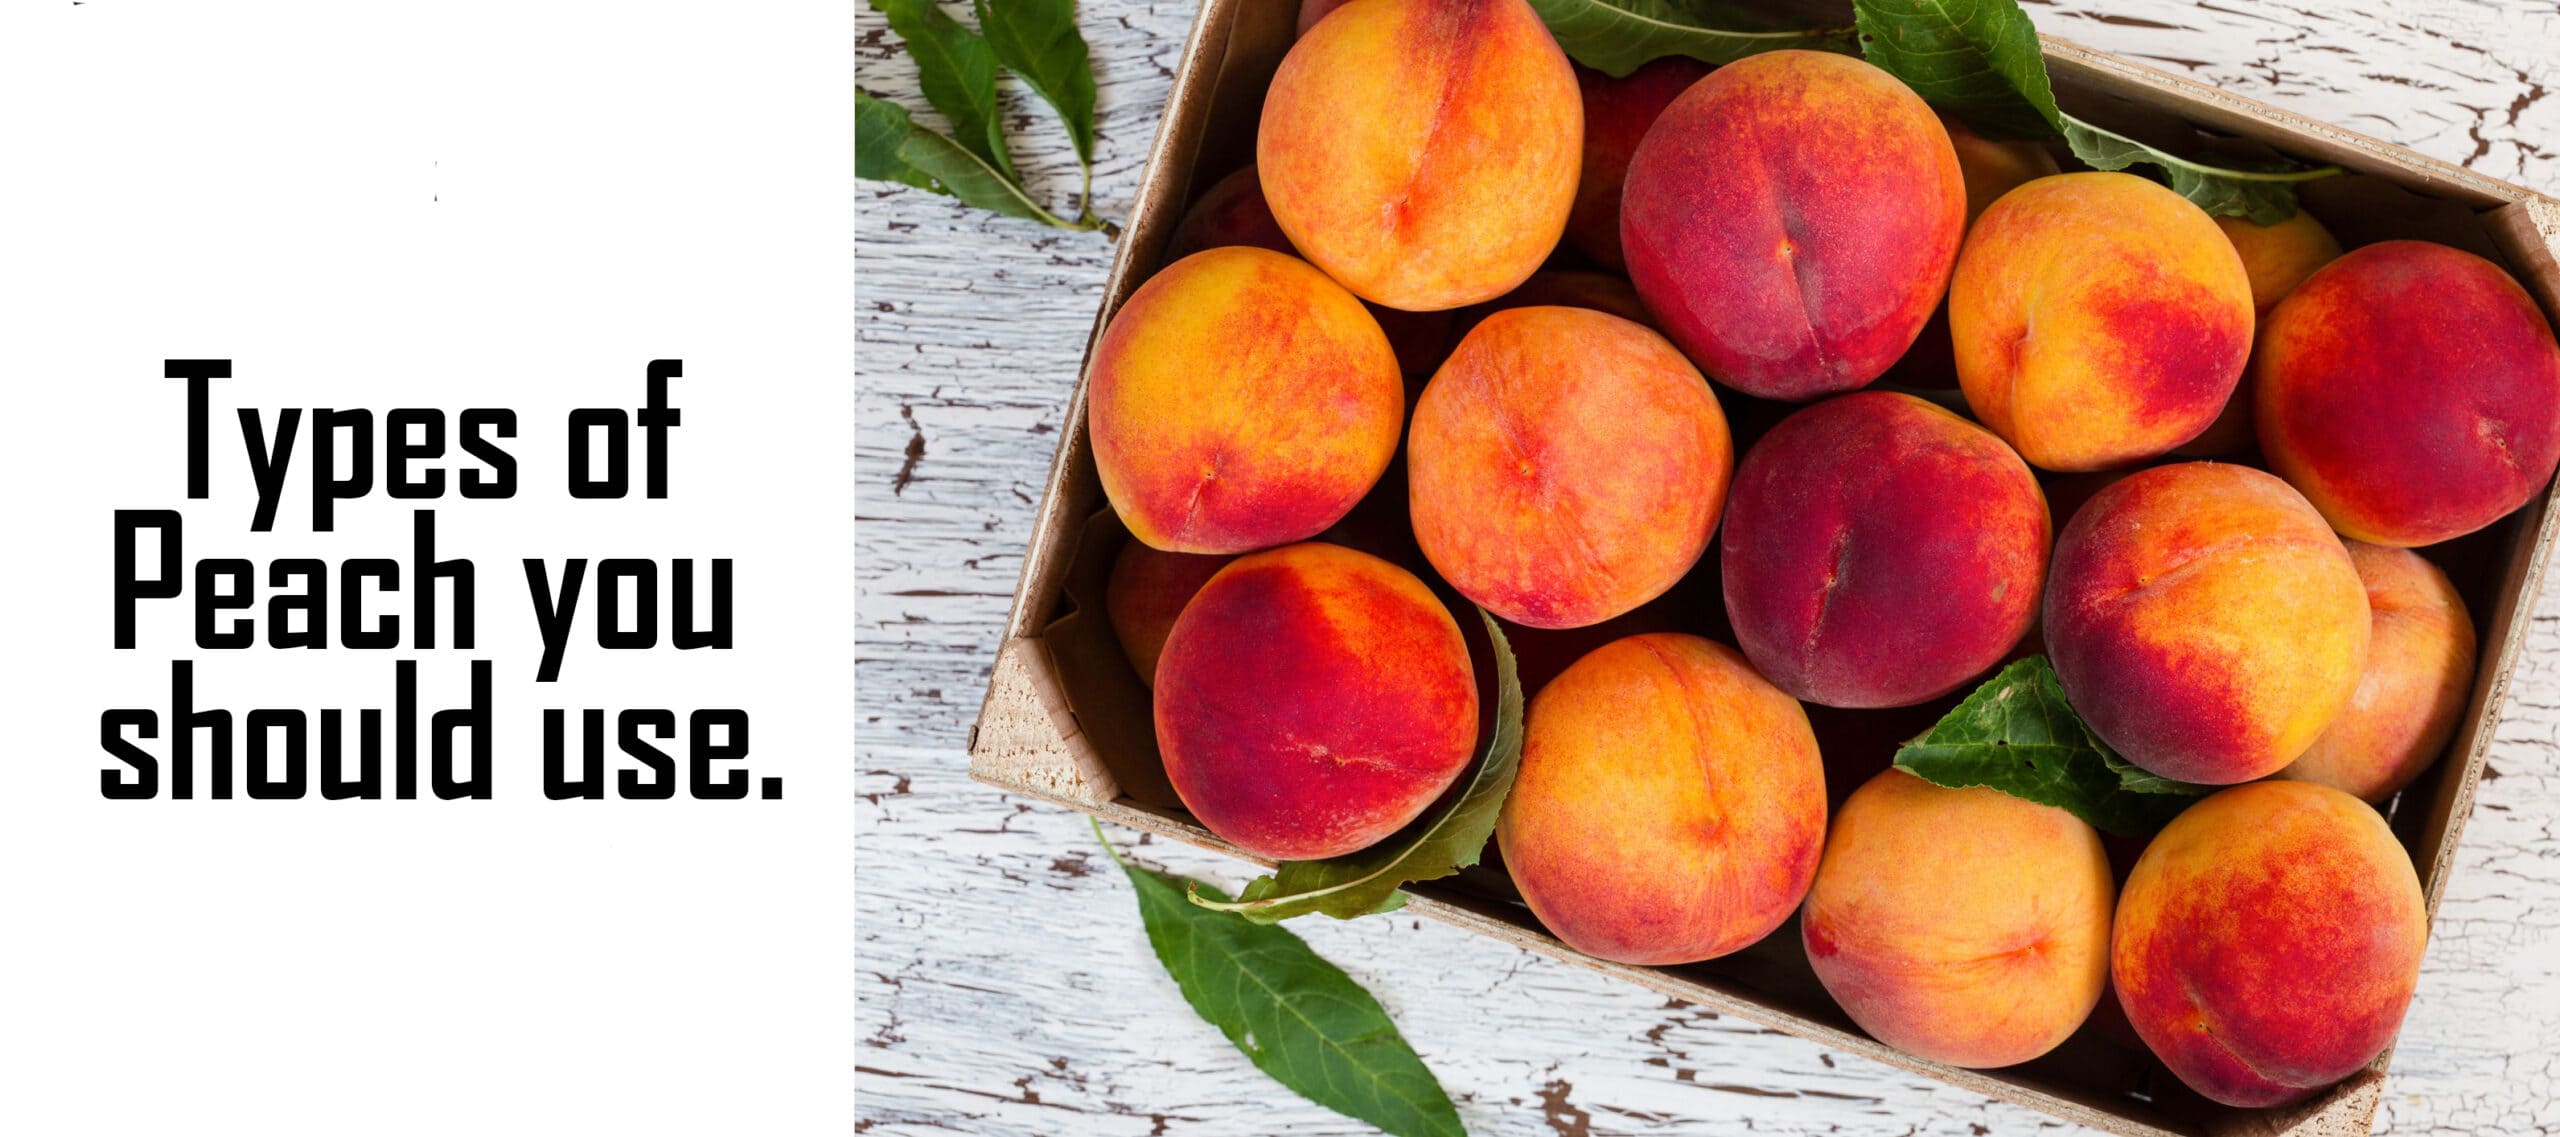 Types of Peach you should use